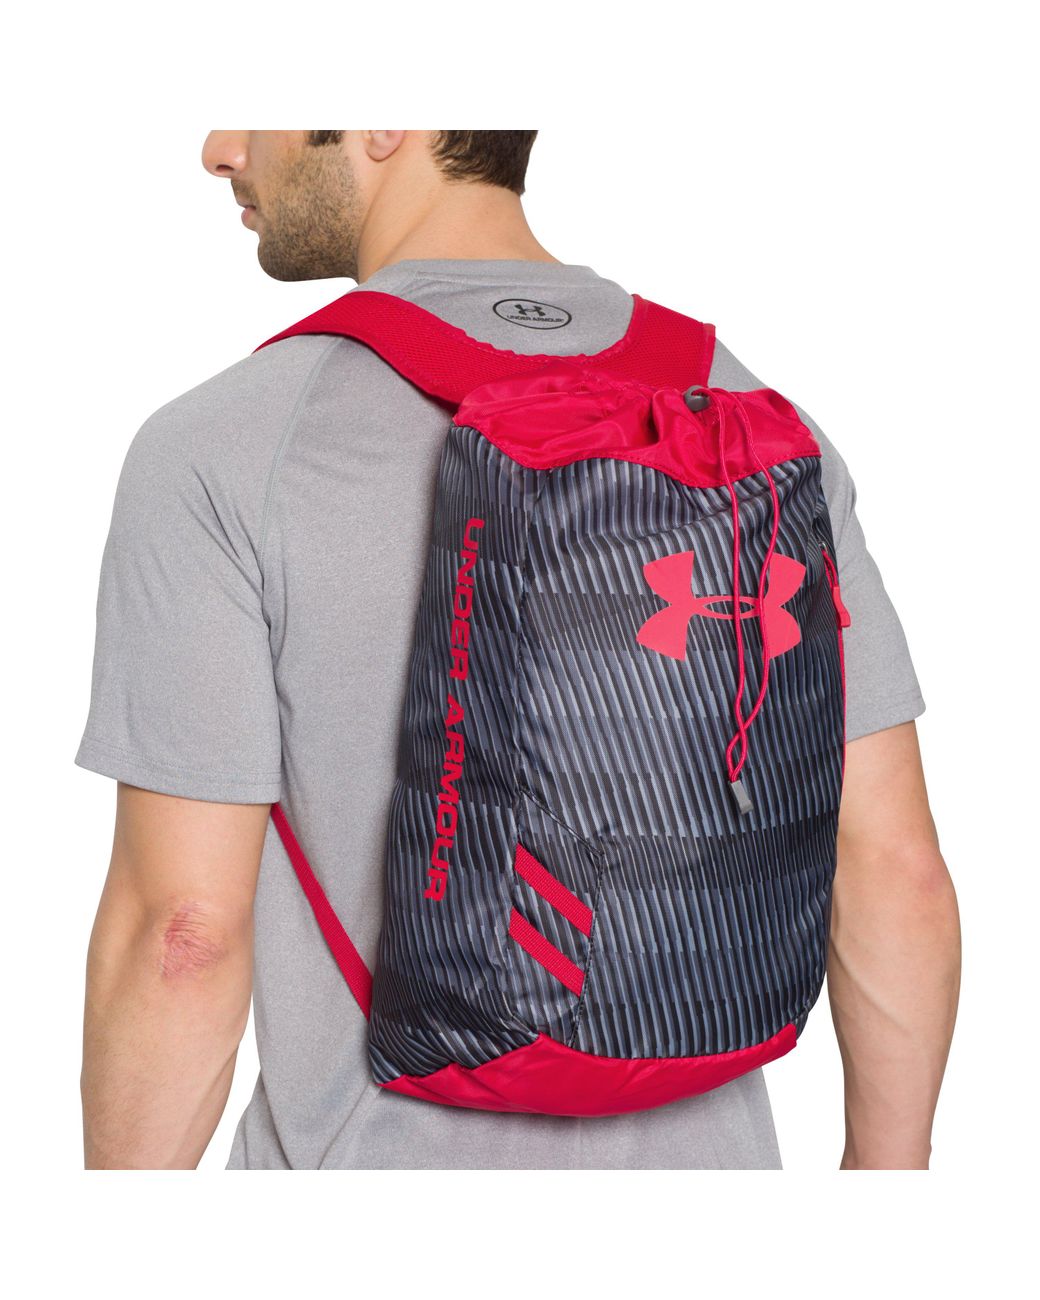 Under Armour Ua Trance Sackpack in Blue for Men | Lyst